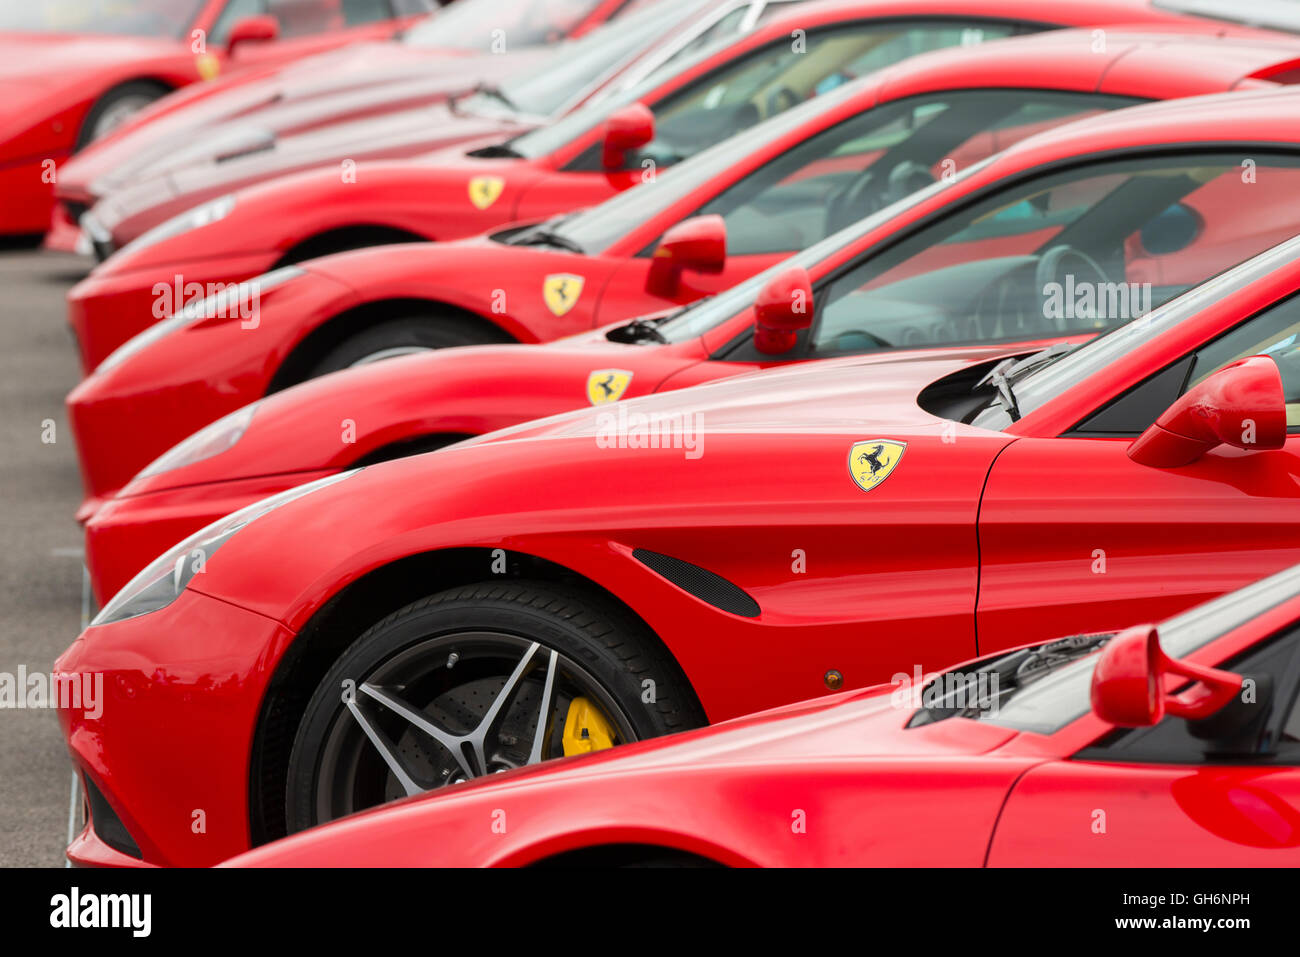 Ferrari Owners Club sports cars lined up at the 2016 Silverstone Classic event, England, UK Stock Photo